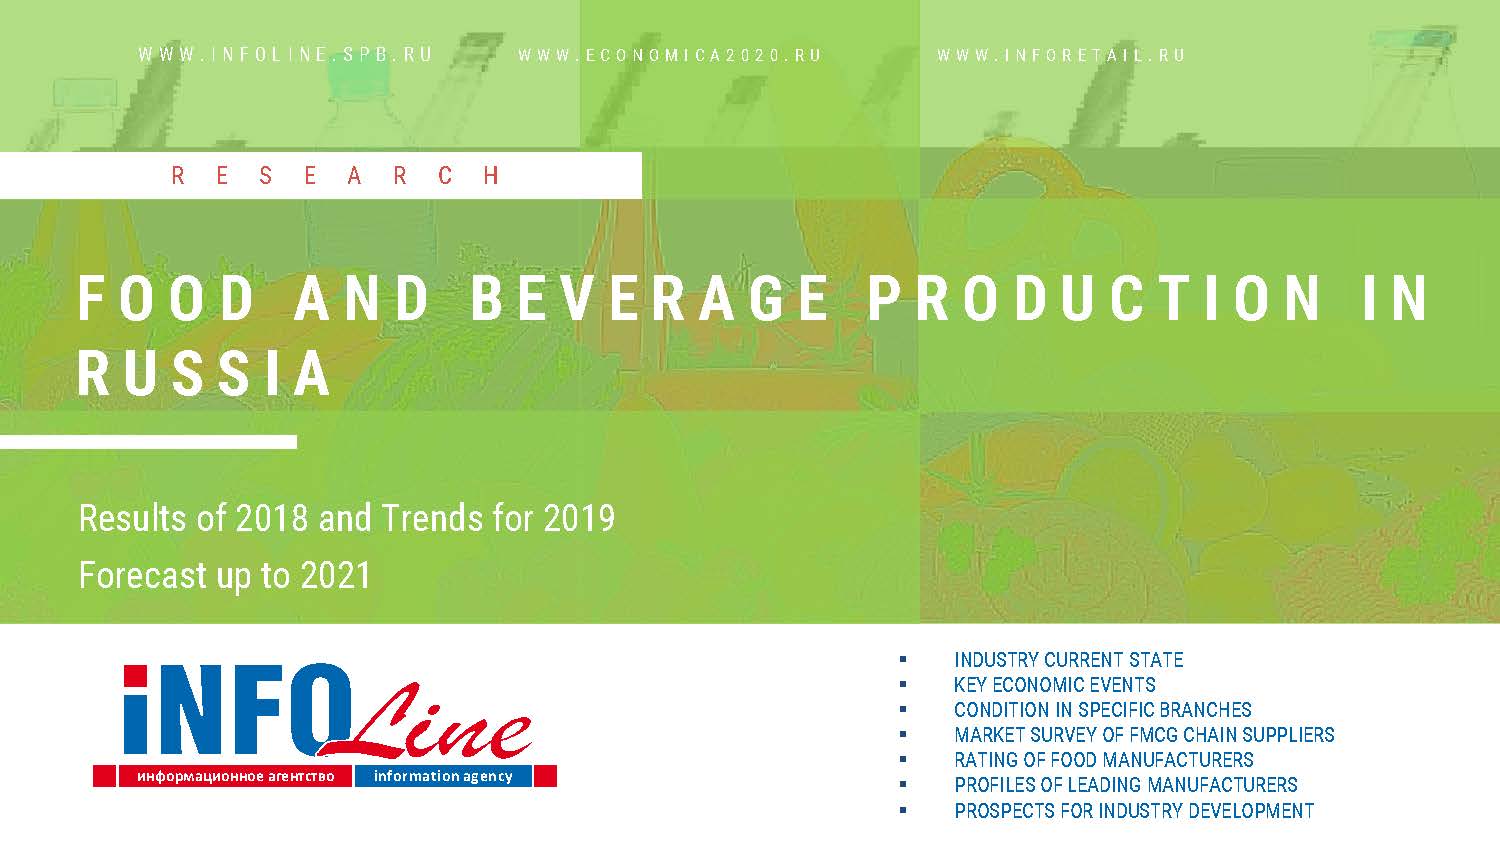 "Food and beverage production in Russia. Results of 2018 and Trends for 2019. Forecast up to 2021"